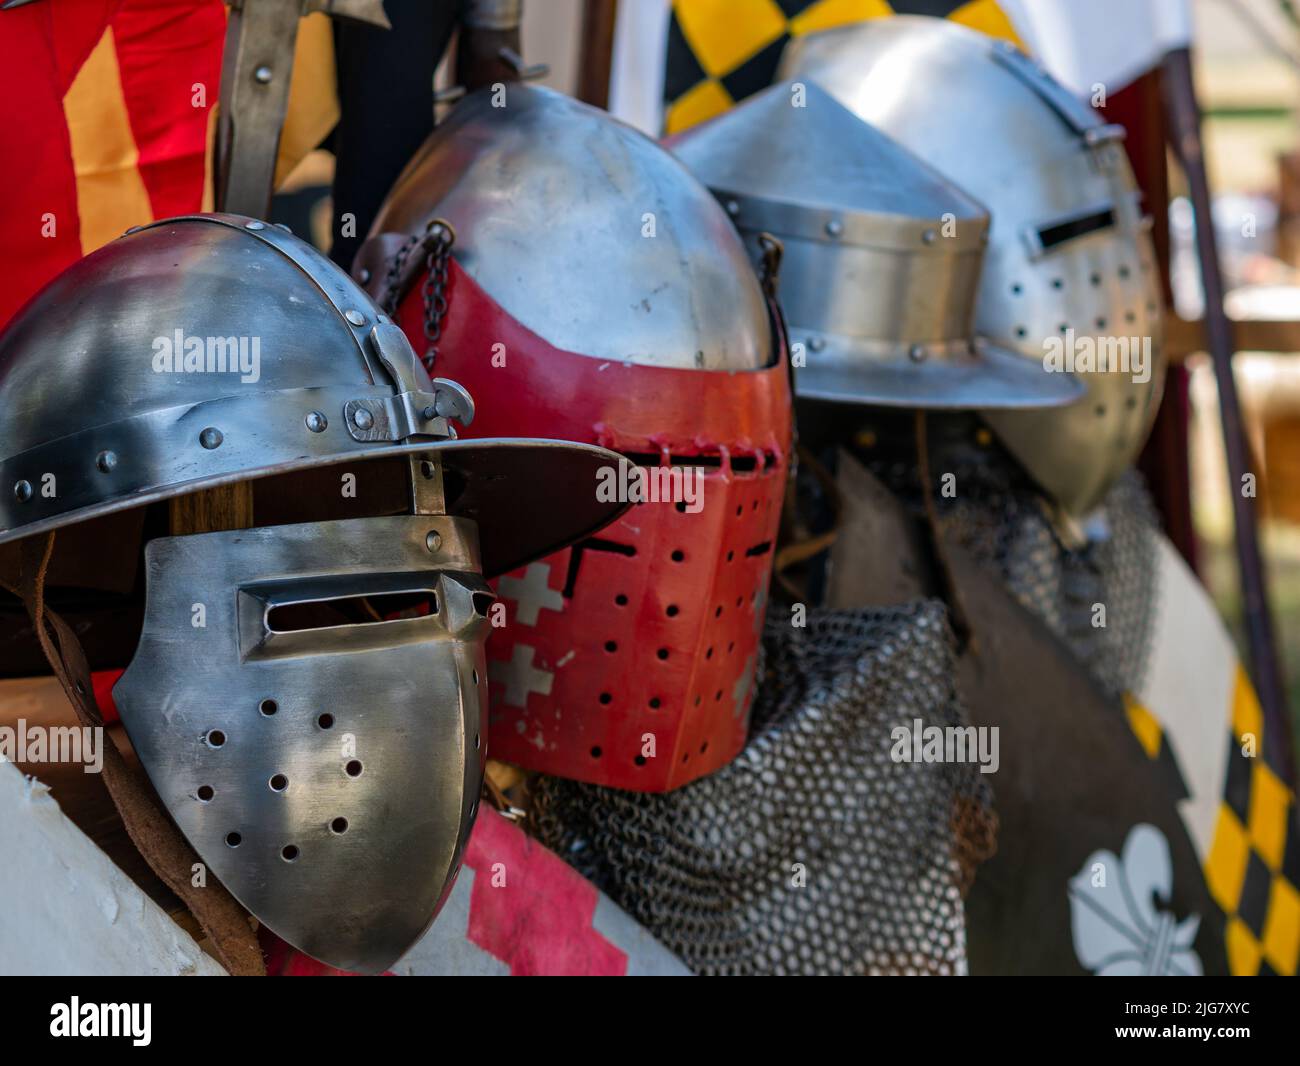 display of various types of medieval plate armor helmets Stock Photo